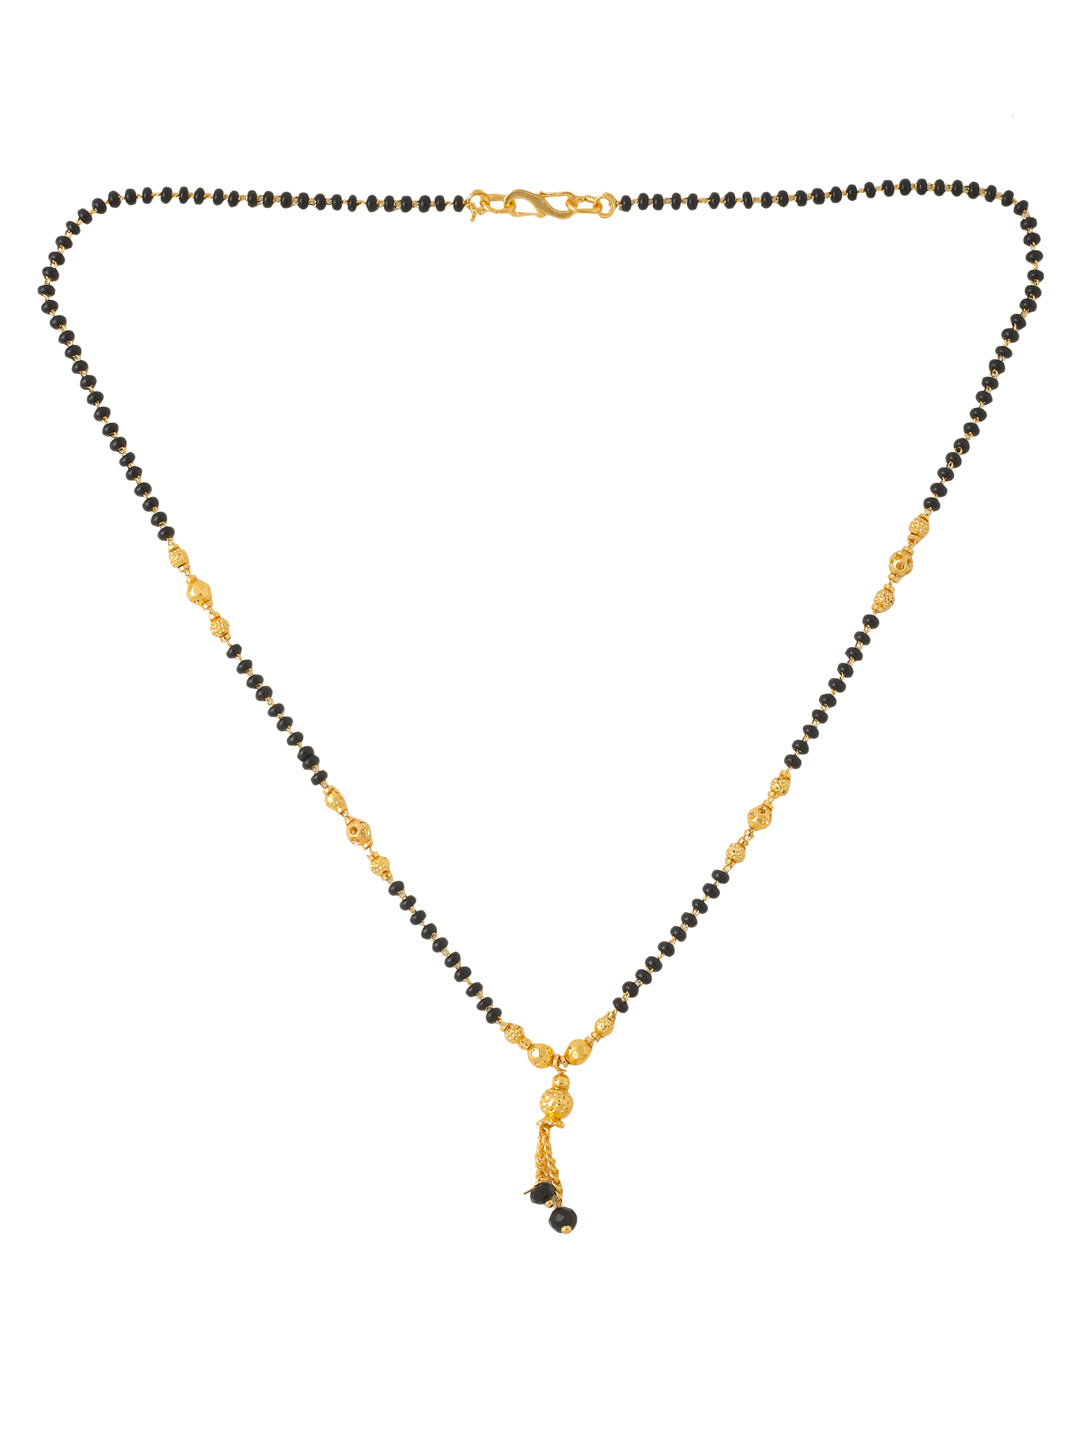 Women's Ethnic Gold-Plated Beaded Mangalsutra - NVR